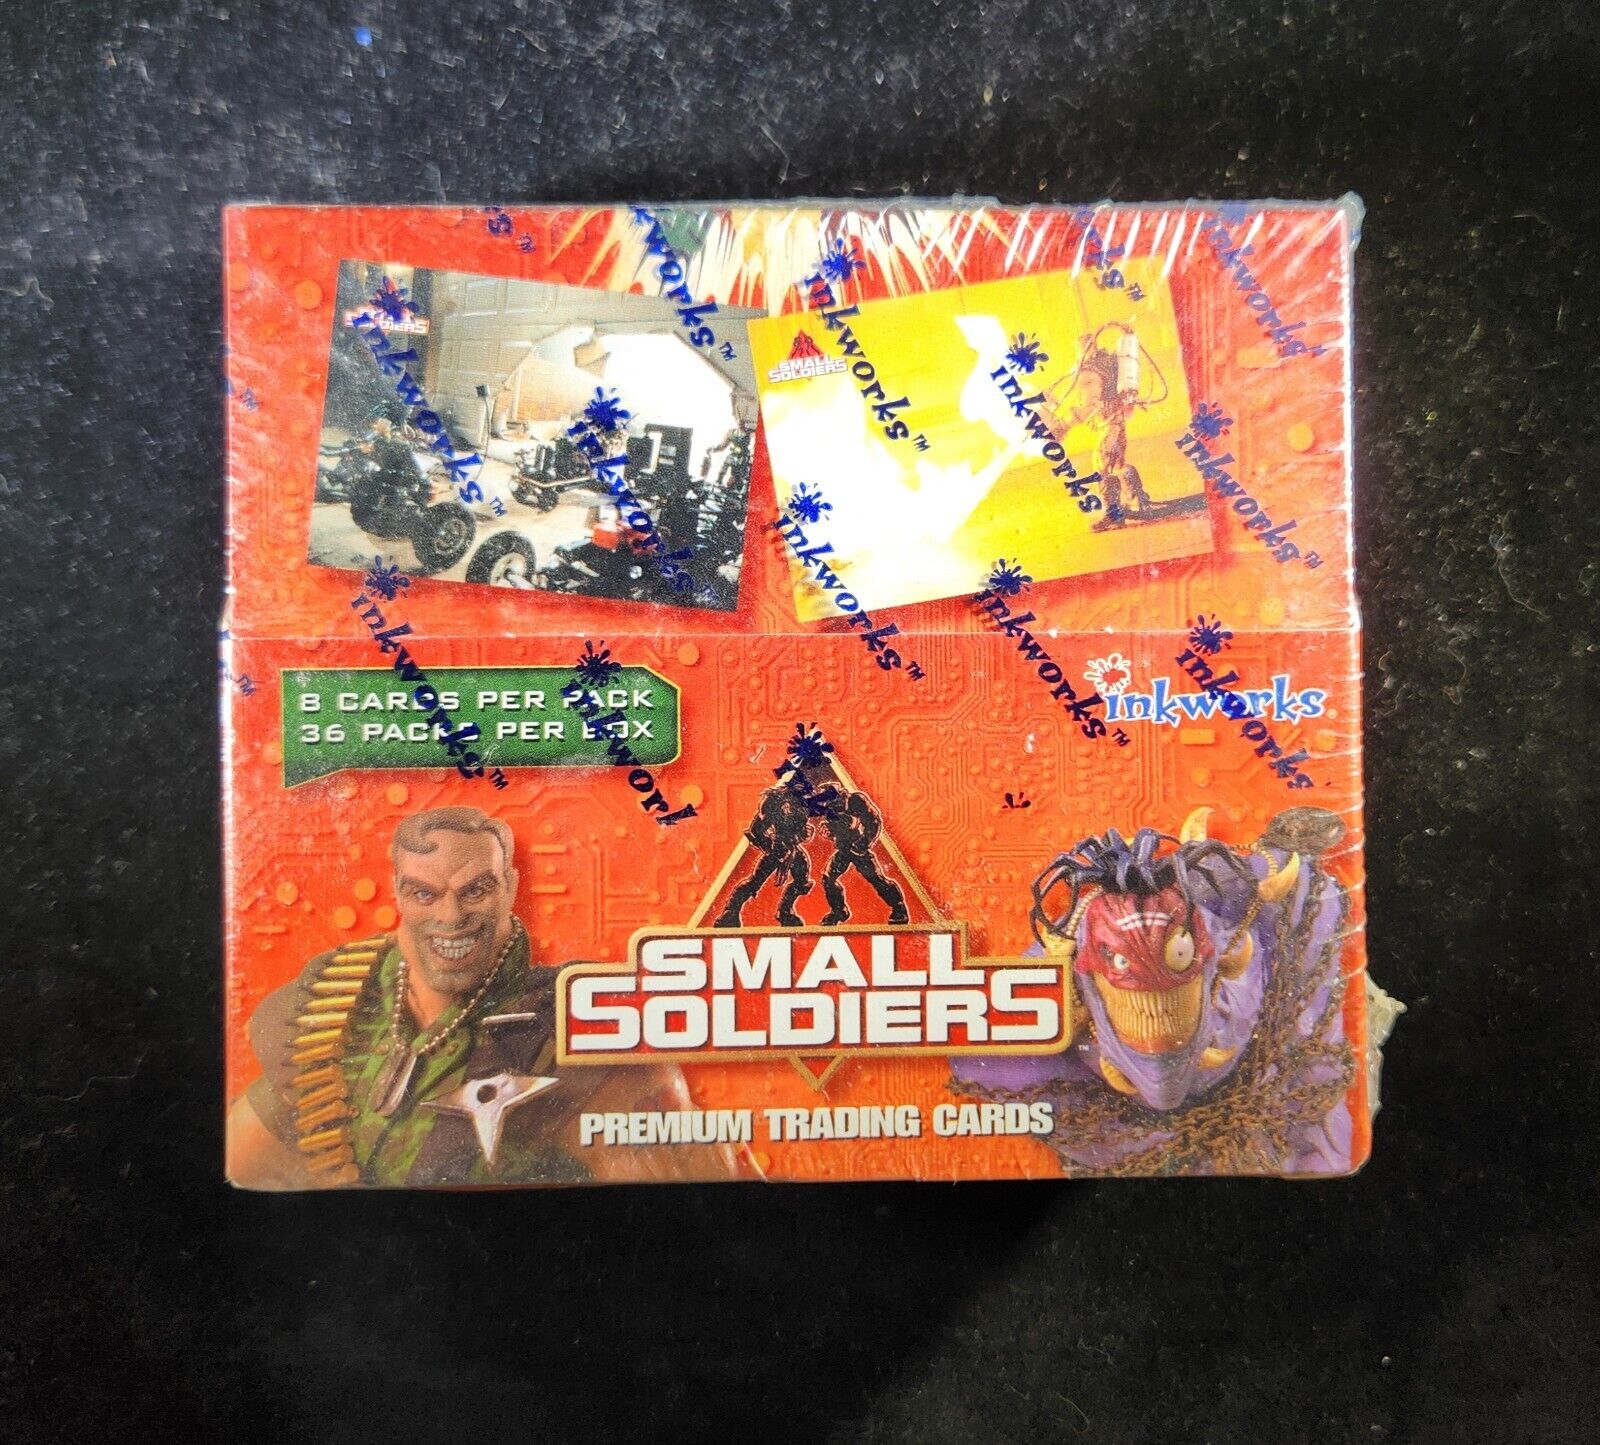 Small Soldiers Premium Trading Cards - Sealed Box - Inkworks